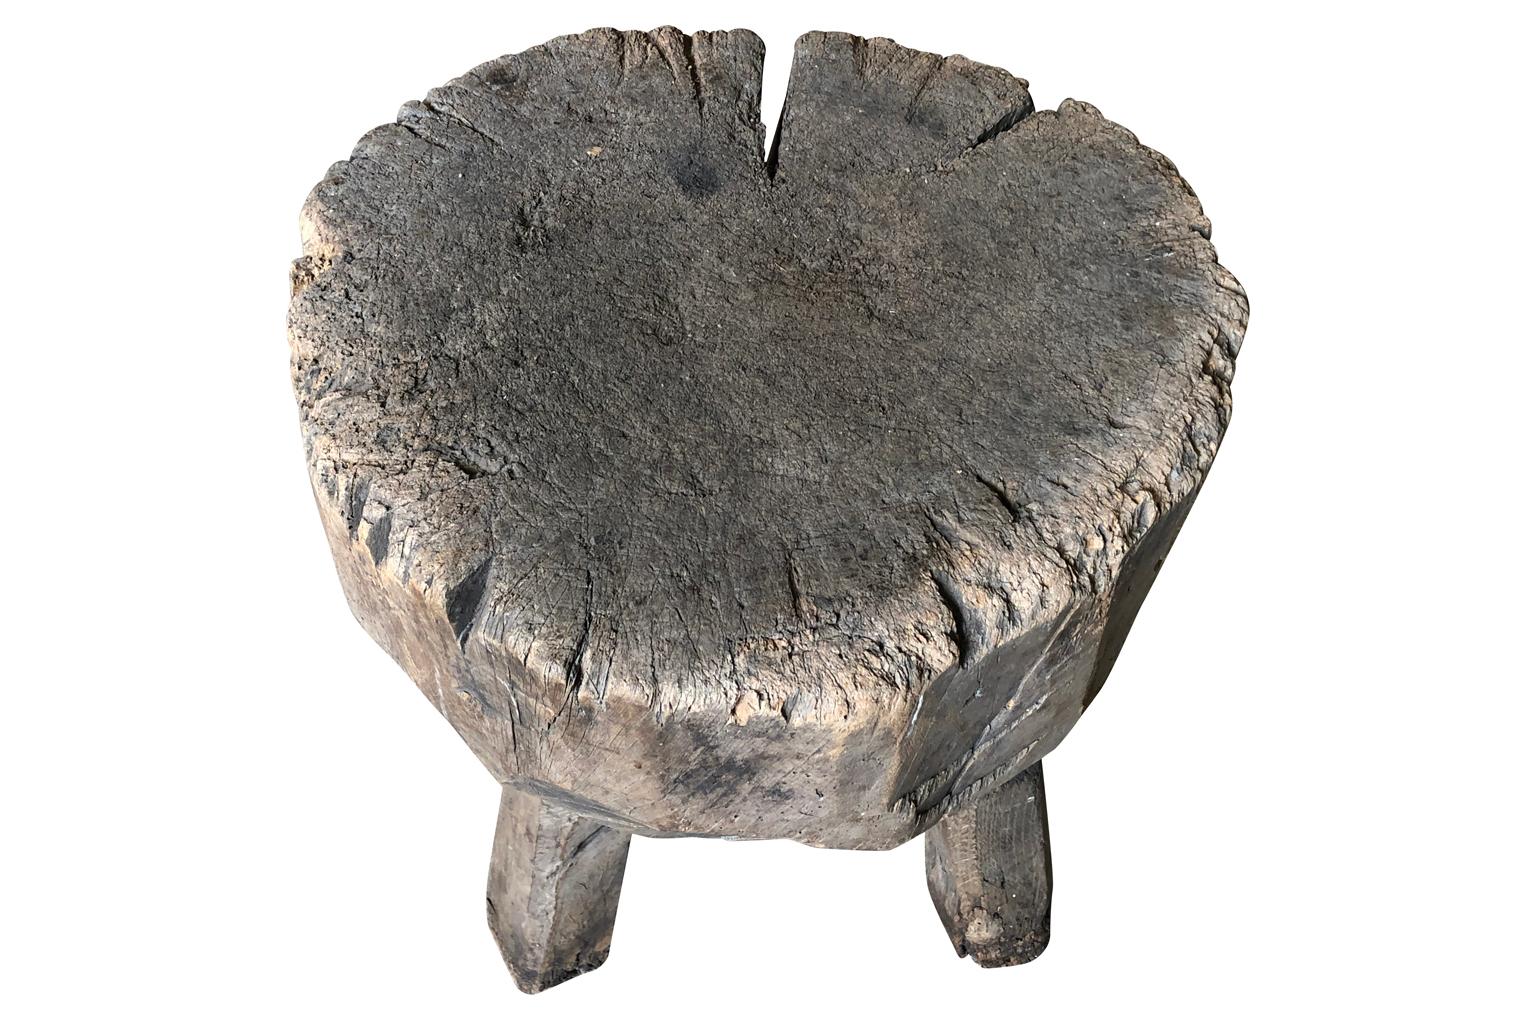 A terrific 19th century Billot, chopping block from the Provence region of France. Sturdily constructed from beech wood. Wonderful patina. Perfect as an end table, cocktail table or coffee table for any casual interior or exterior.